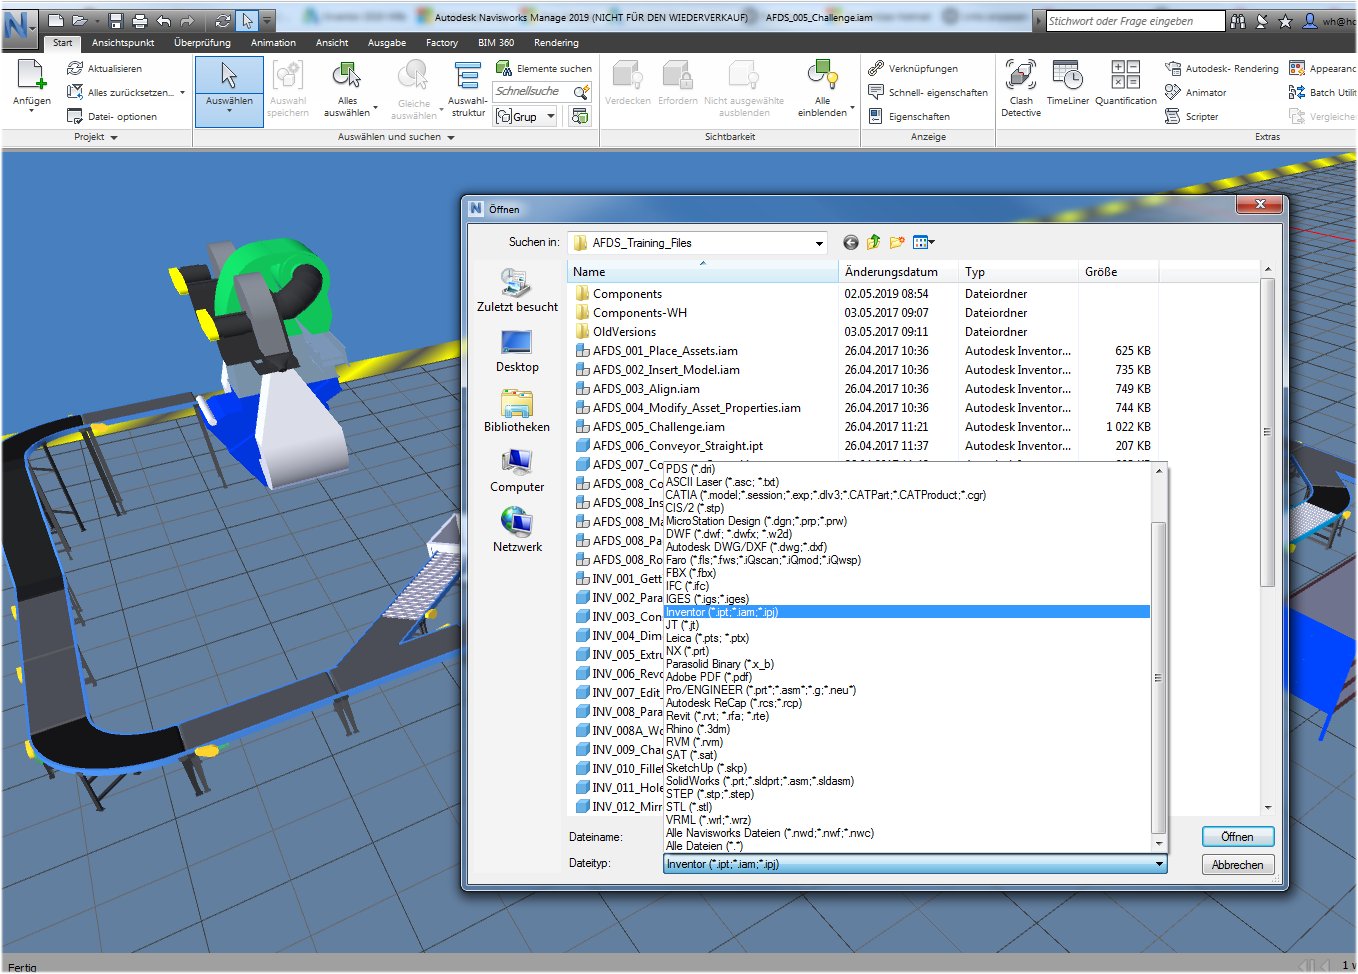 Solved: Inventor models convert to IFC and NWD formats - Autodesk Community  - Inventor